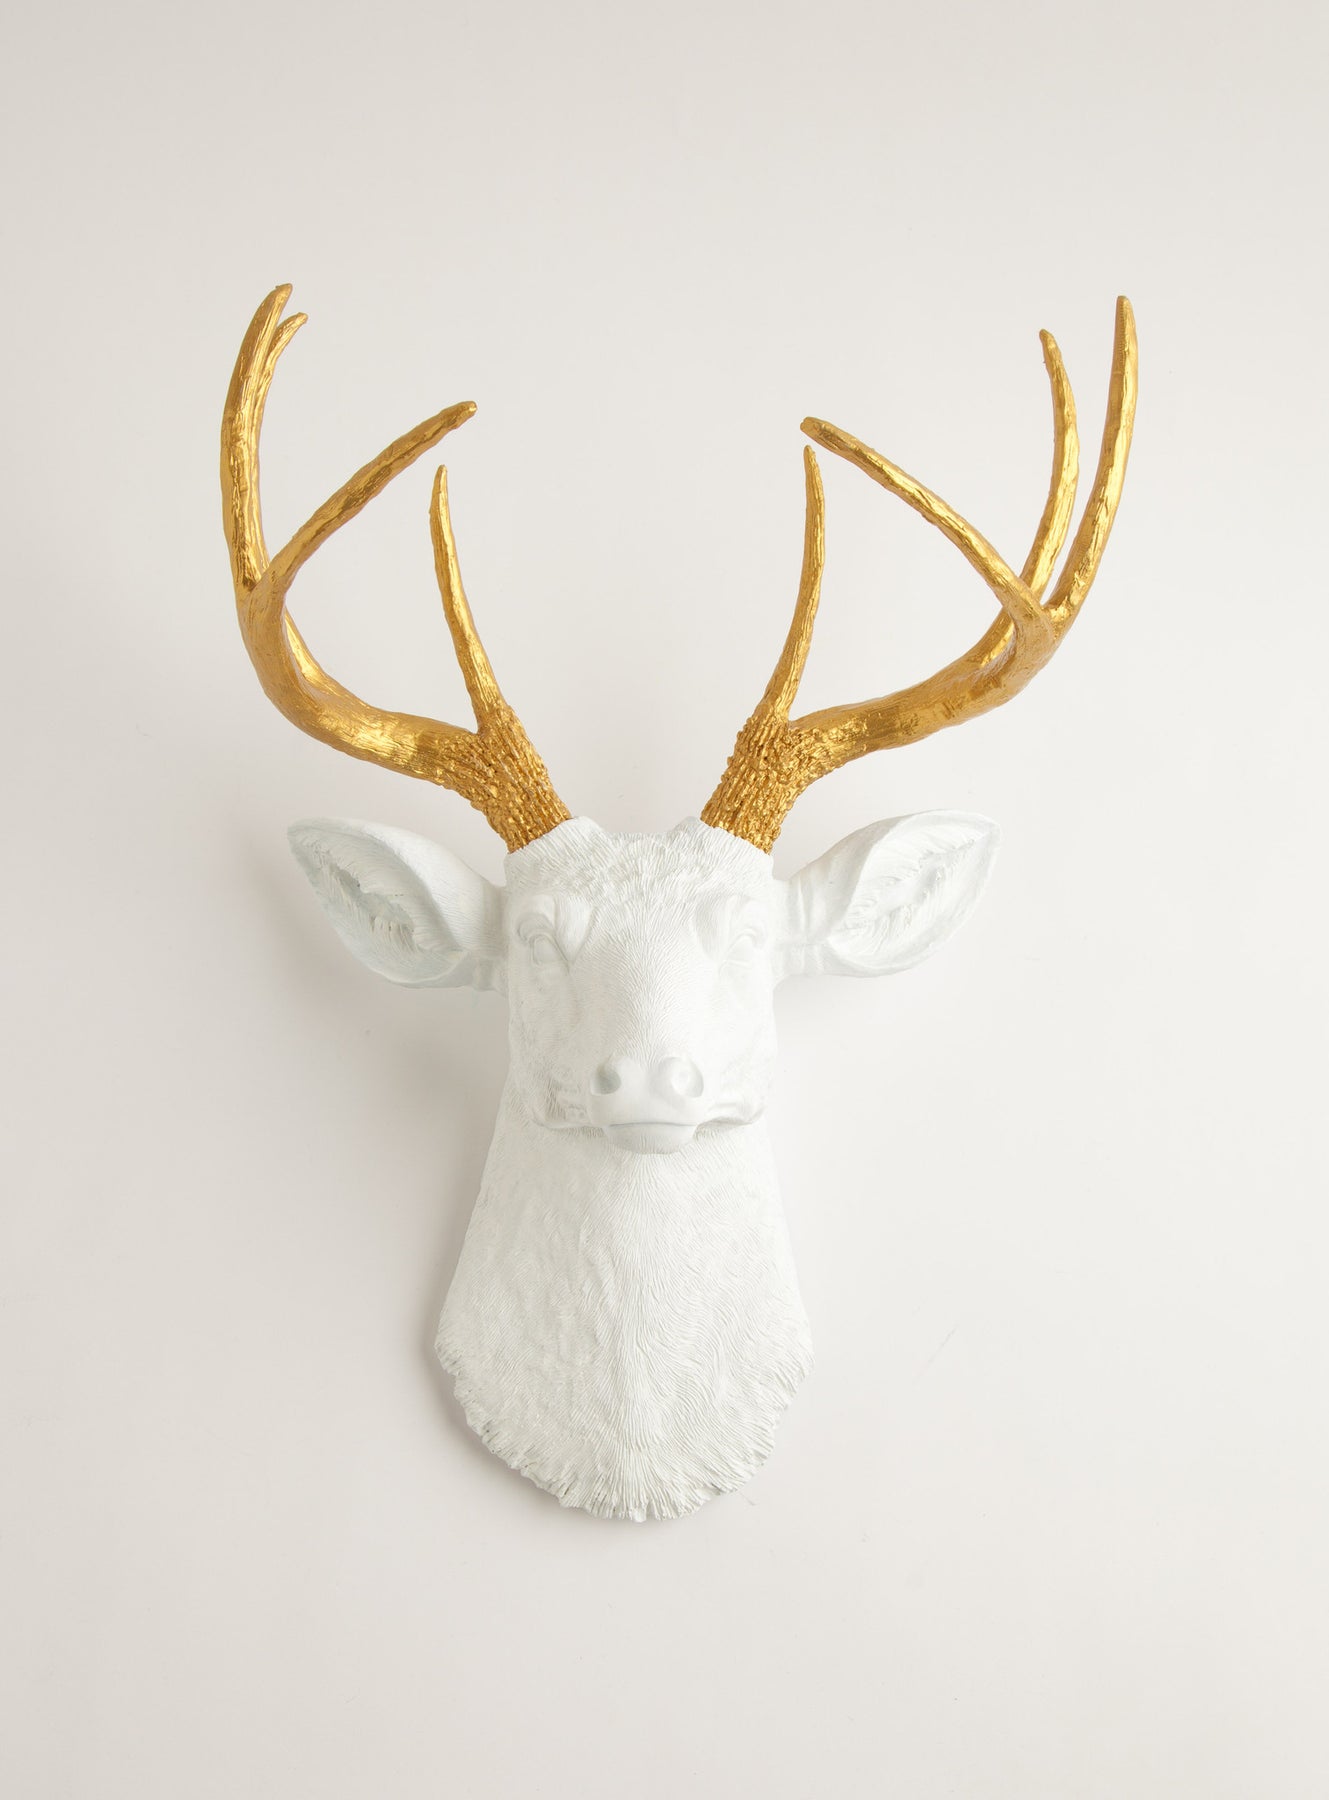 Gold Antlers  White Deer Head Wall Mount, The Alfred